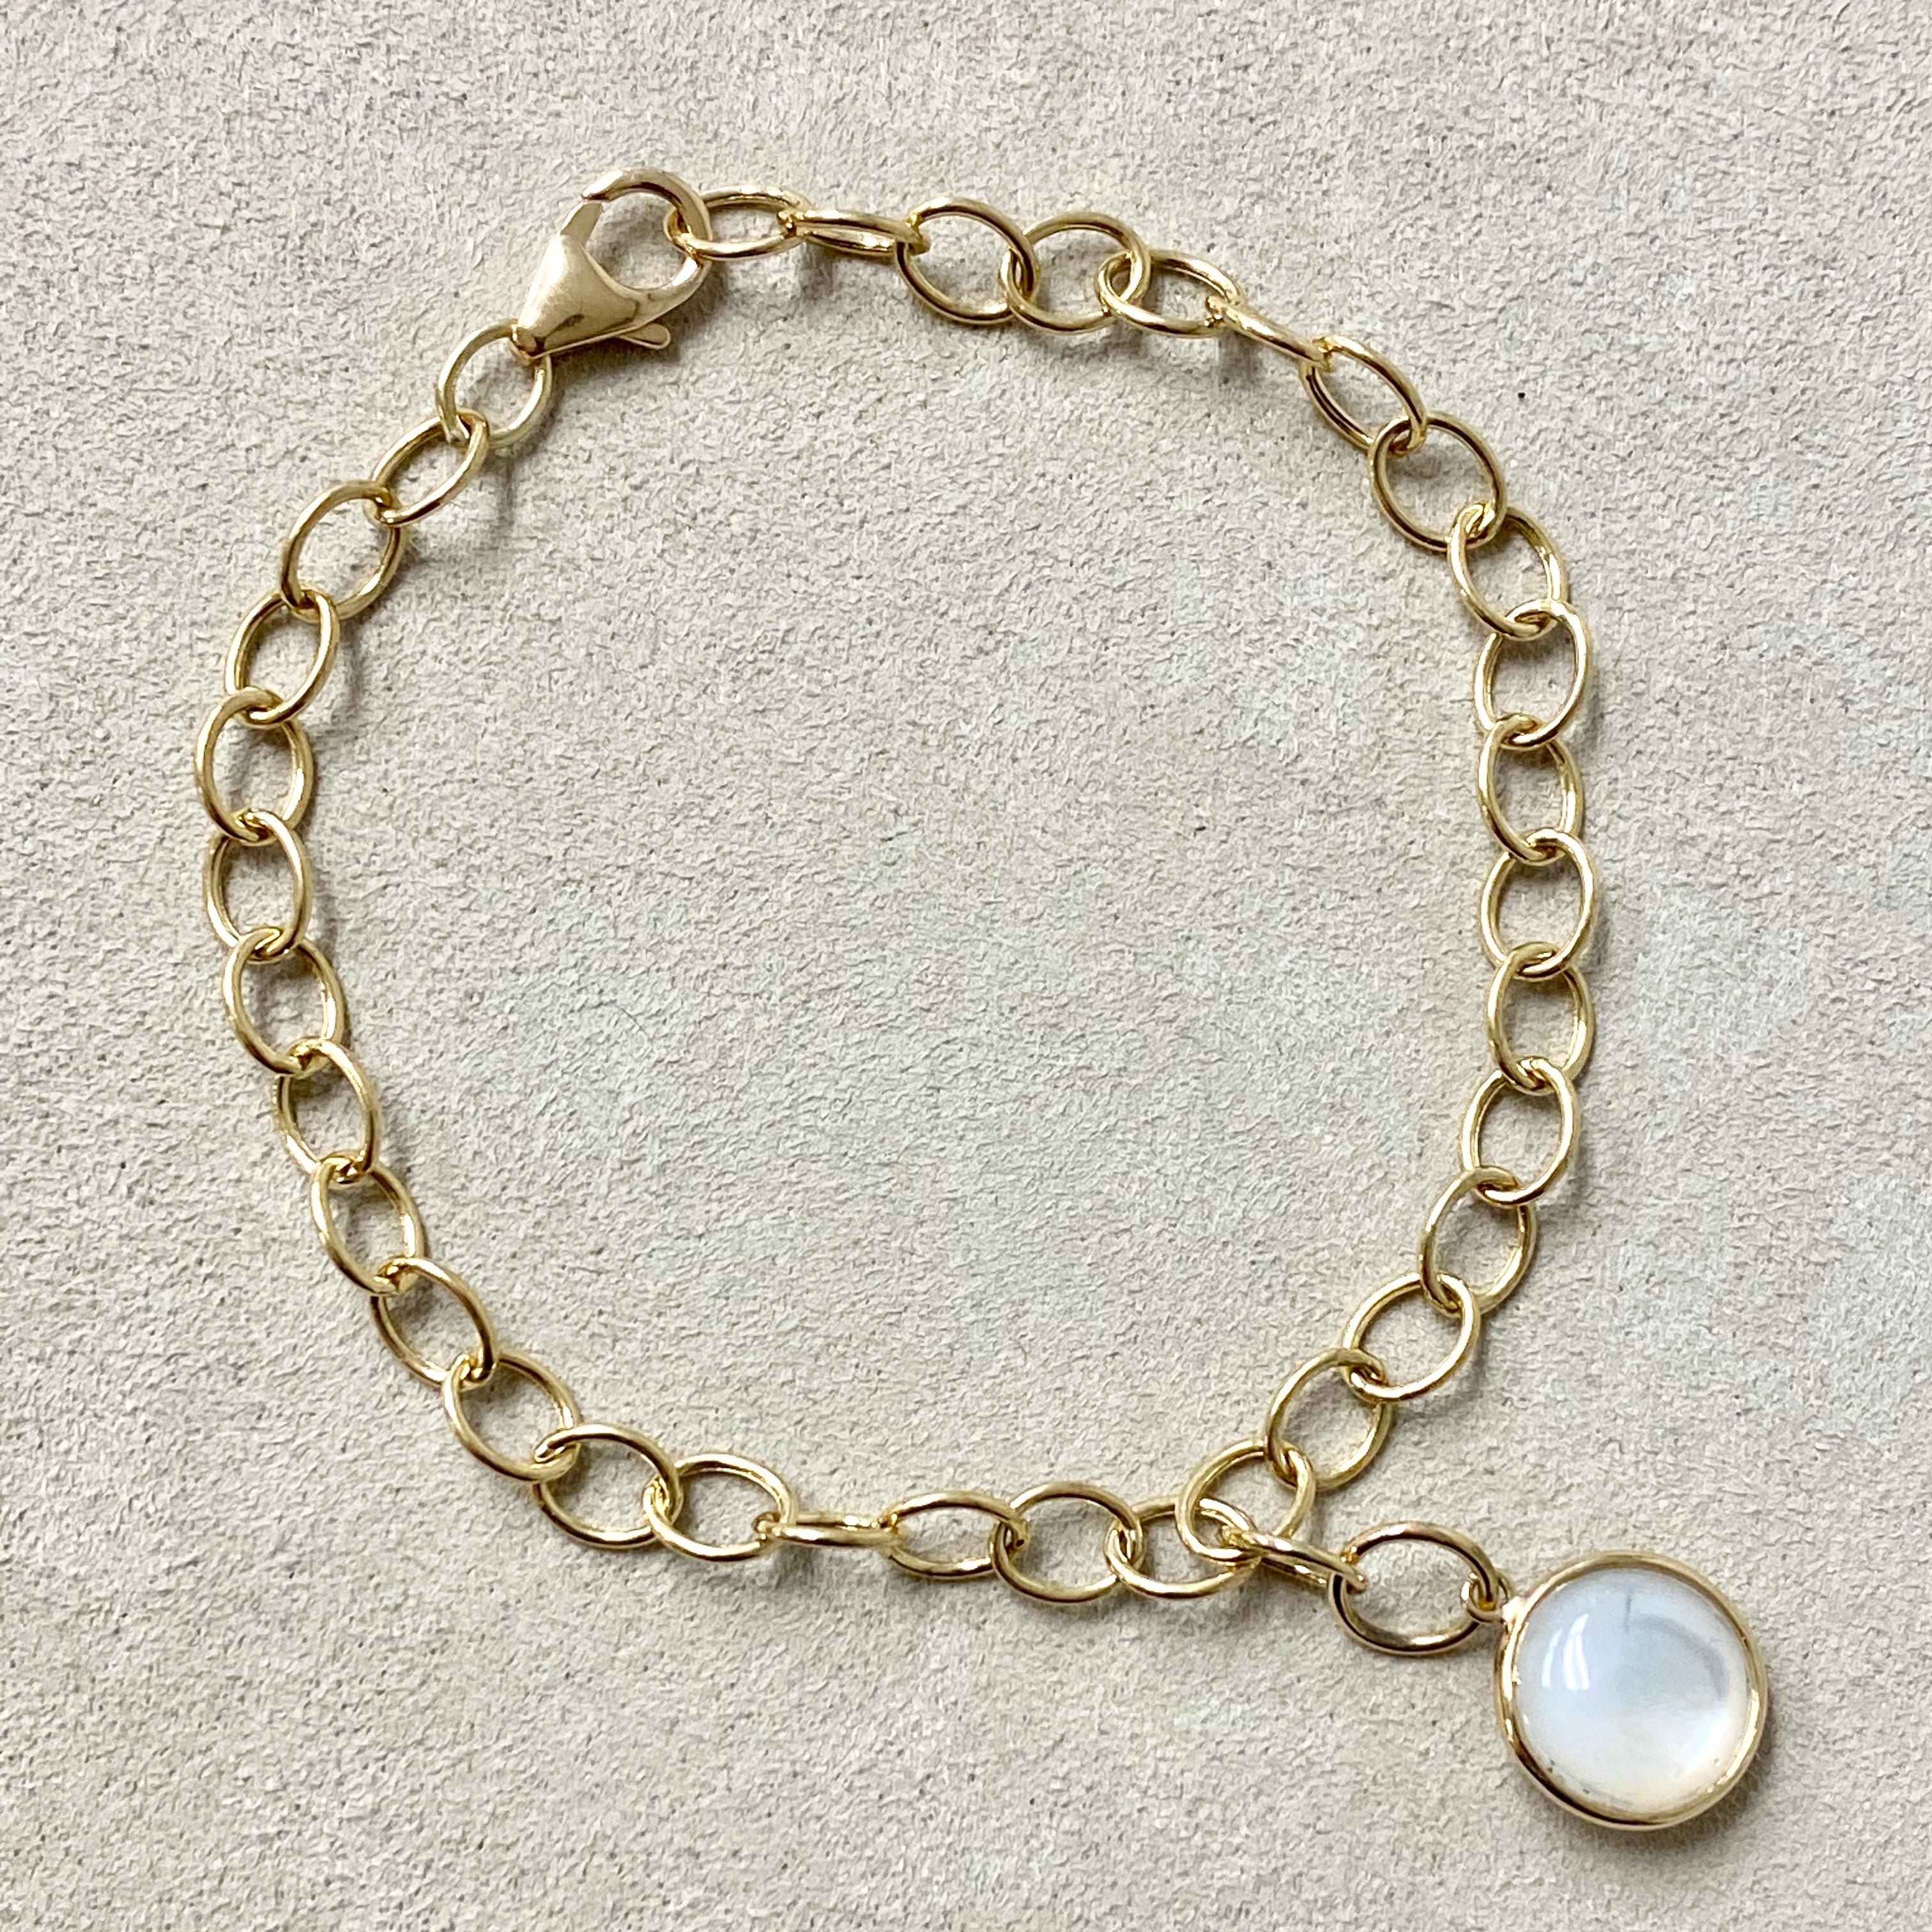 Contemporary Syna Yellow Gold Bracelet with Mother of Pearl